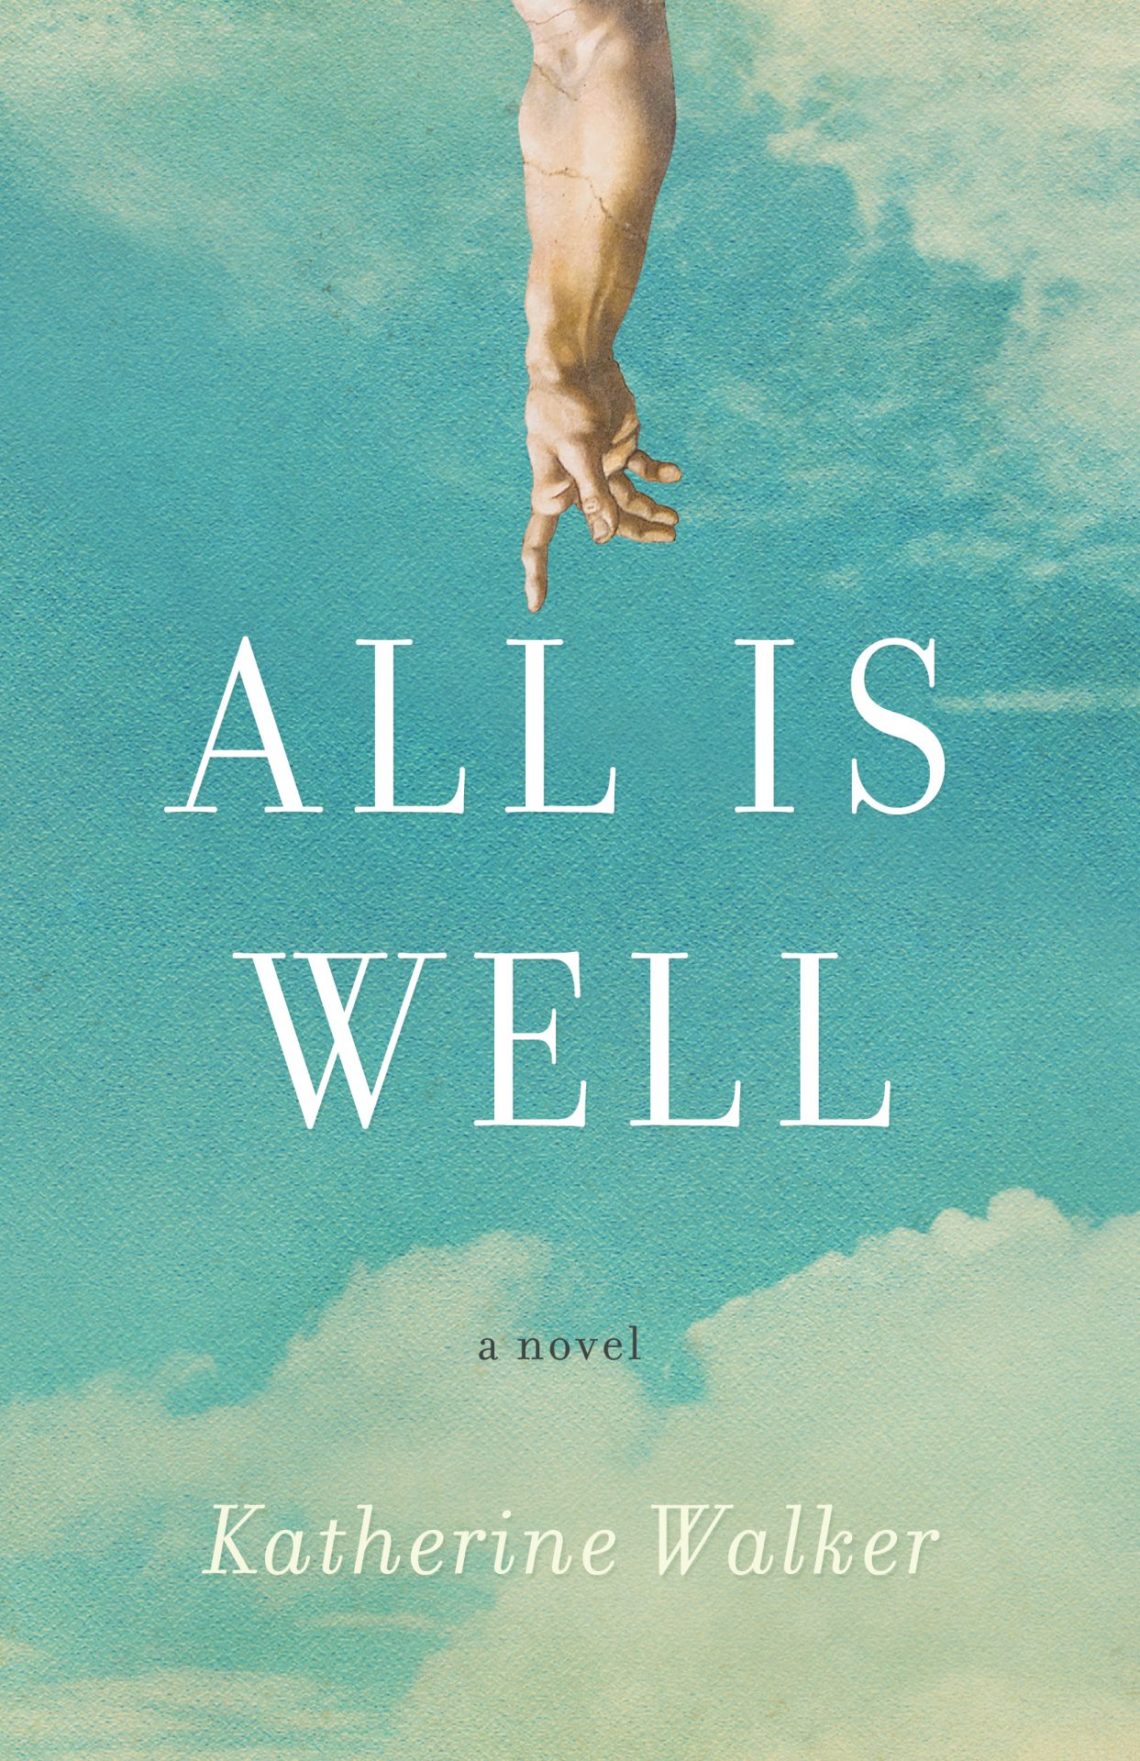 All is Well (2021) by Katherine Walker